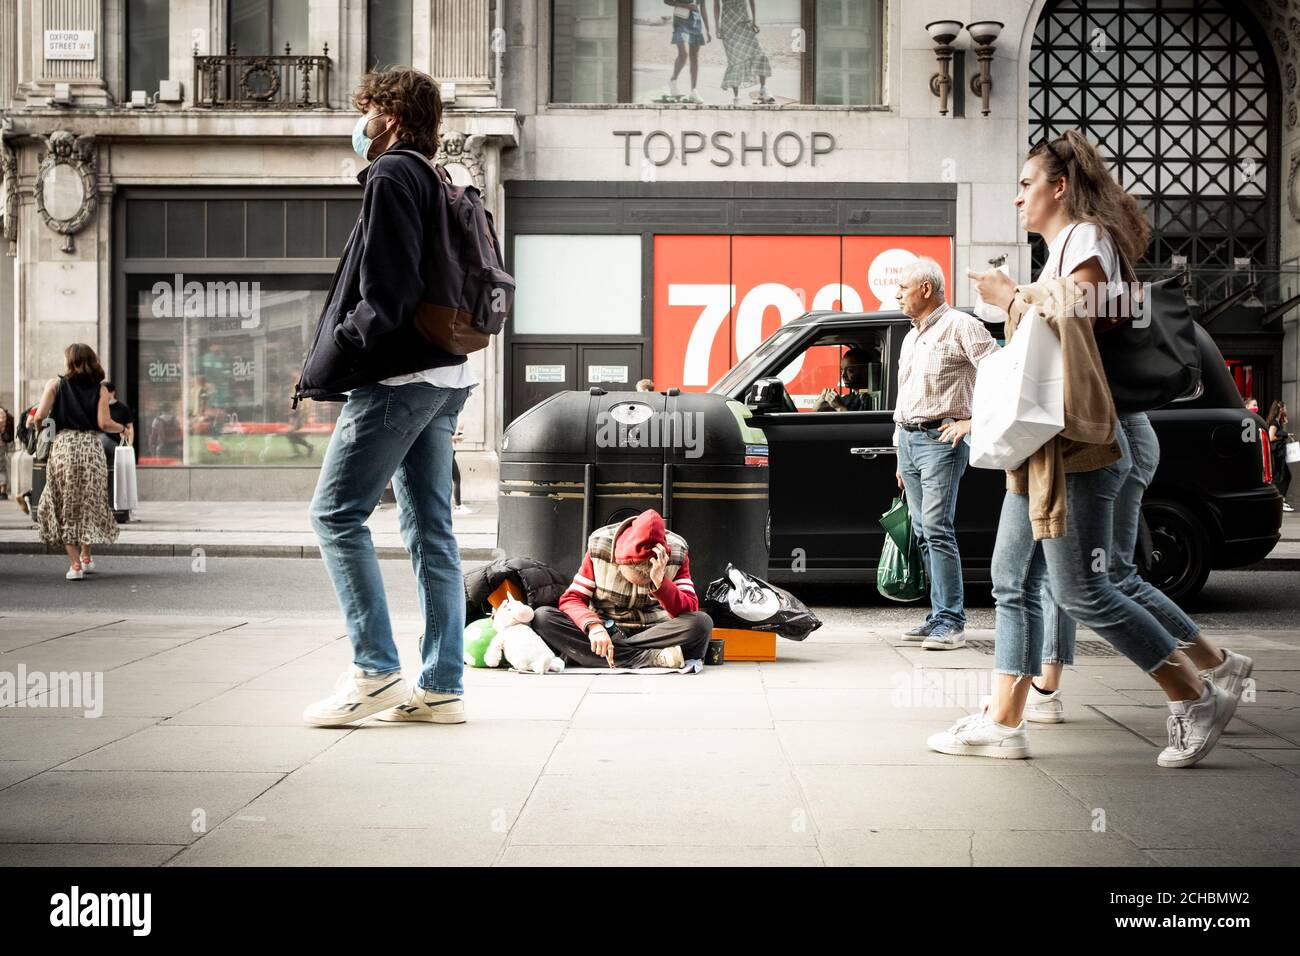 London- September, 2020: A homeless man sits slumped as shoppers walk by on Oxford Street Stock Photo